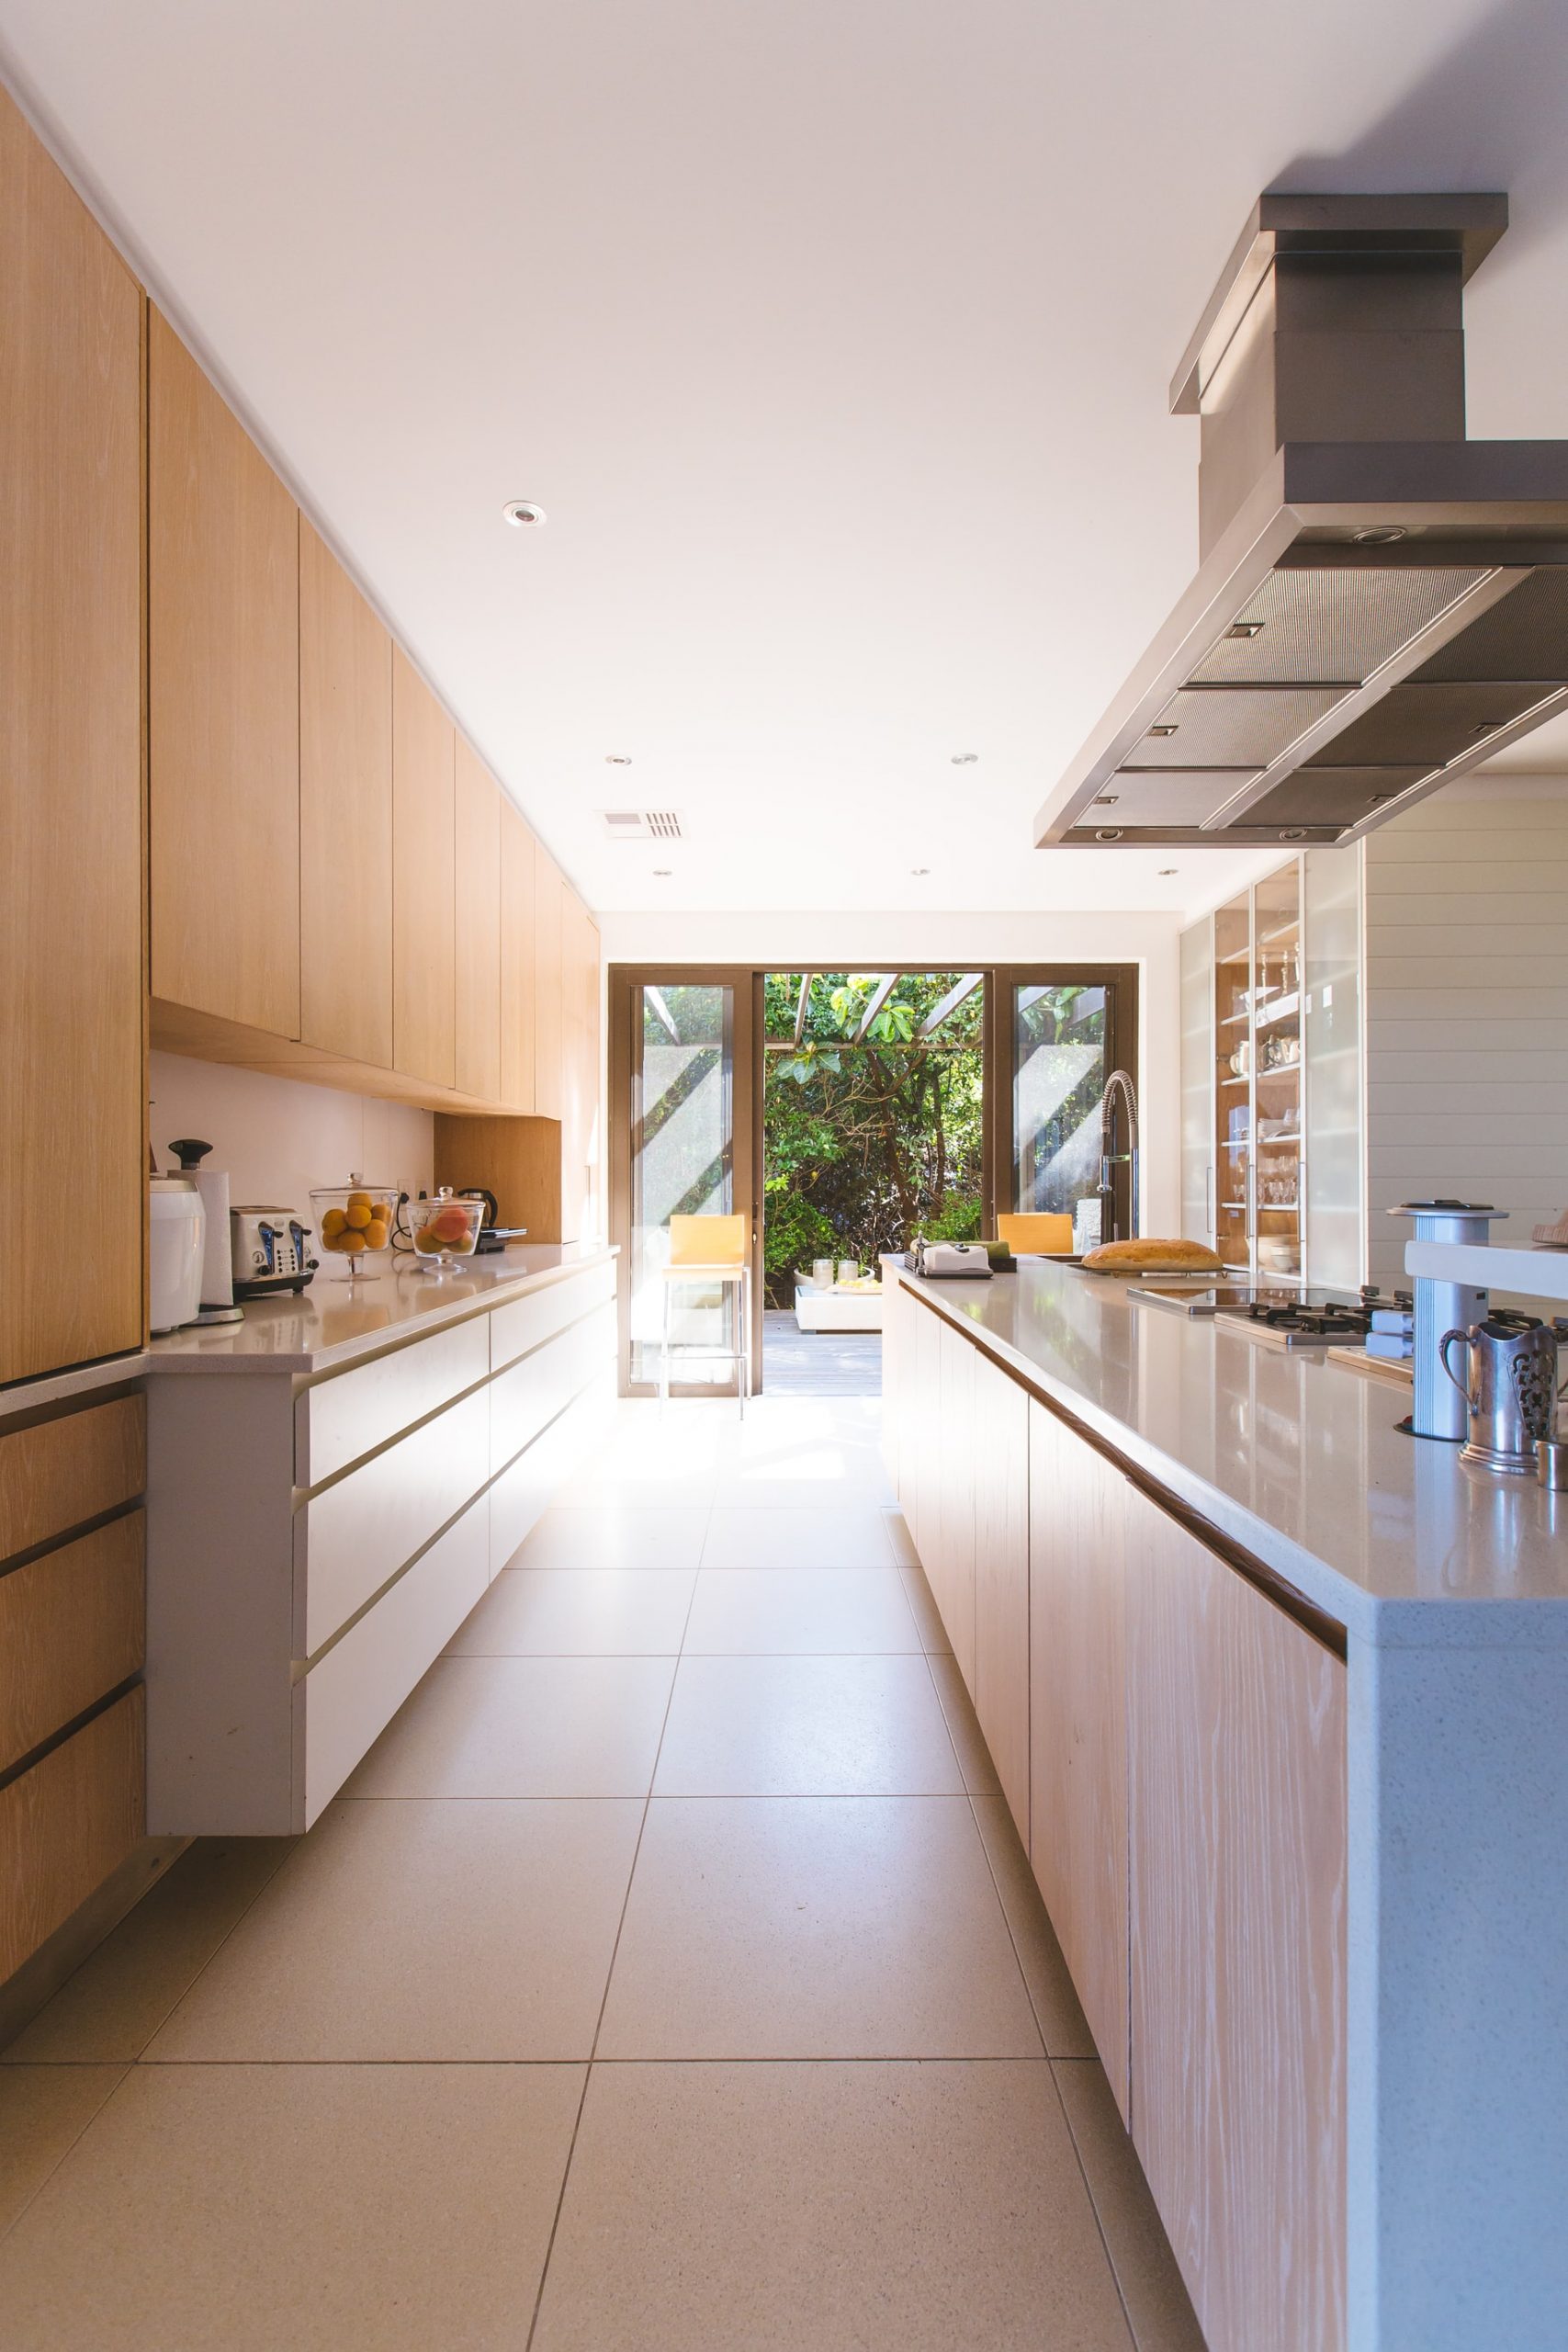 A galley kitchen with an extension leading into the garden.